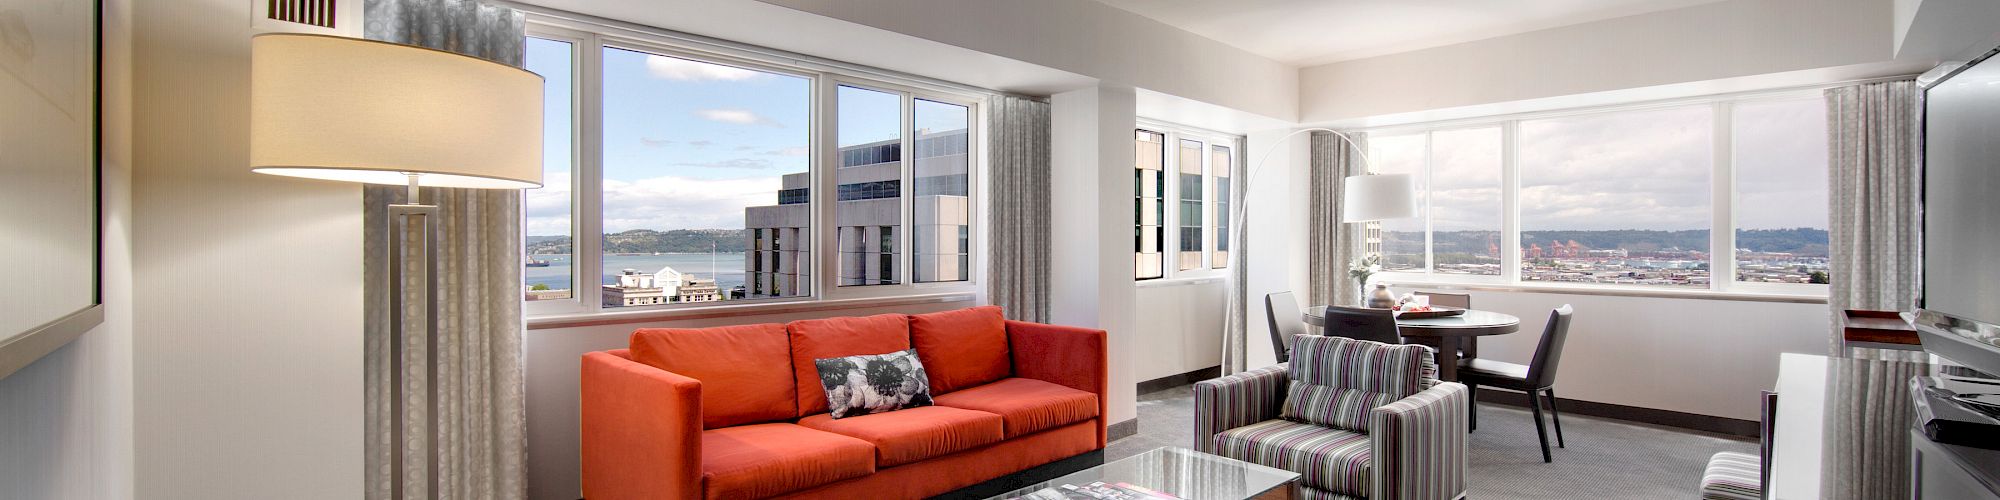 A modern, spacious living room features a red sofa, striped chairs, a glass-top coffee table, and large windows with cityscape views in the background.